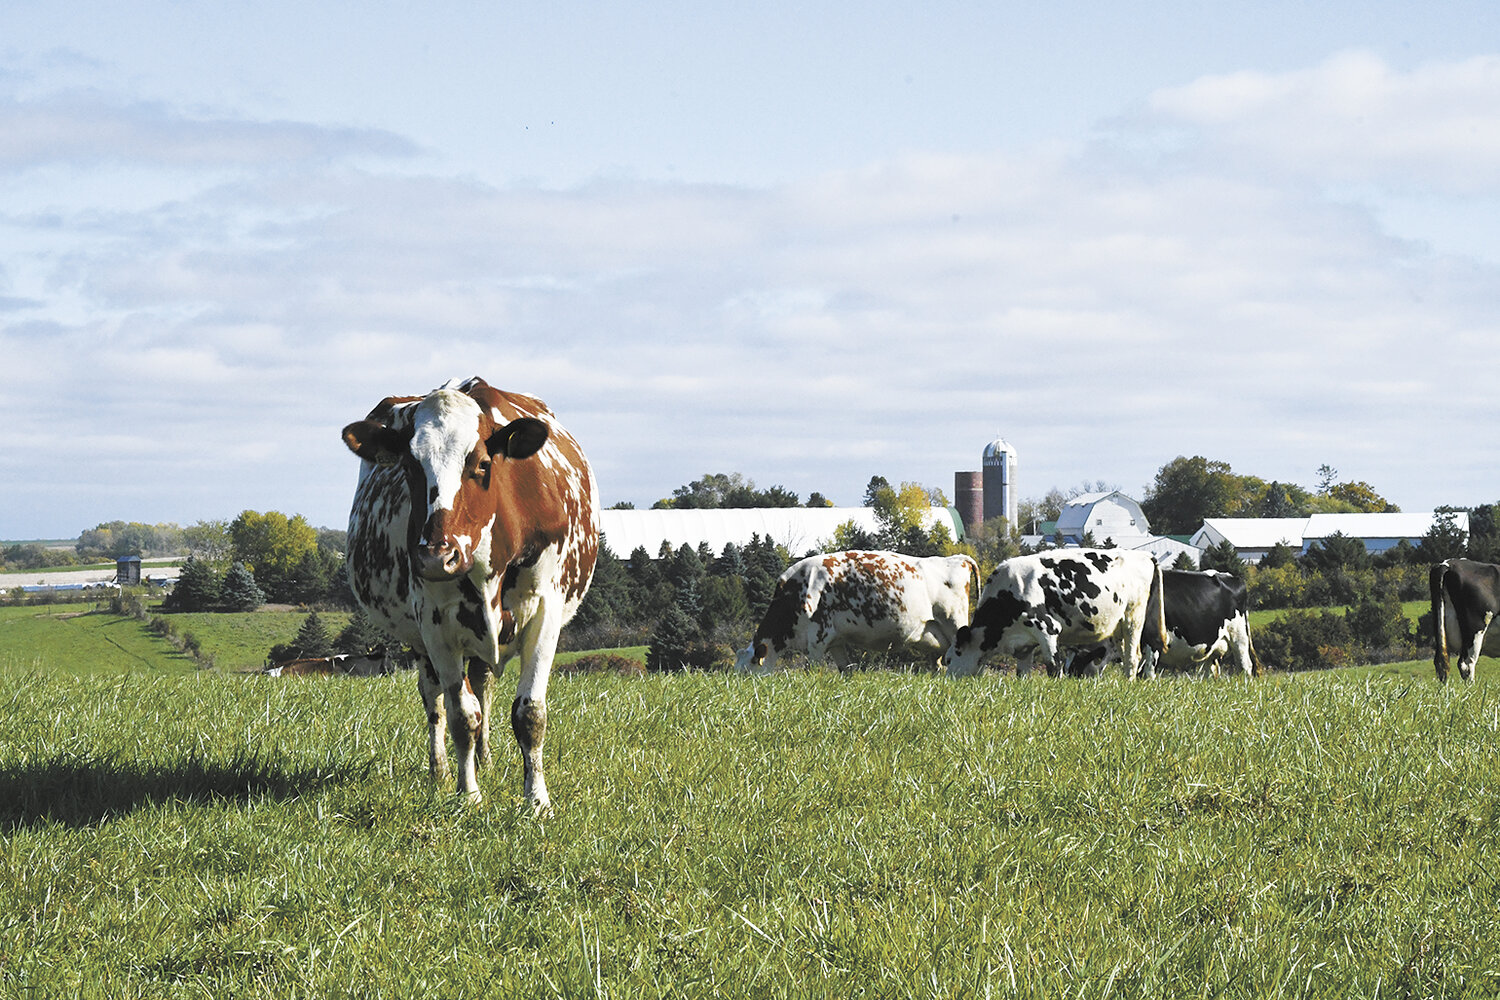 Cows graze Oct. 16 in a pasture overlooking the building site of the Wiebusch dairy farm near Lake City, Minnesota. The Wiebusches have a 13,000-pound herd average on an entirely grass-fed diet.